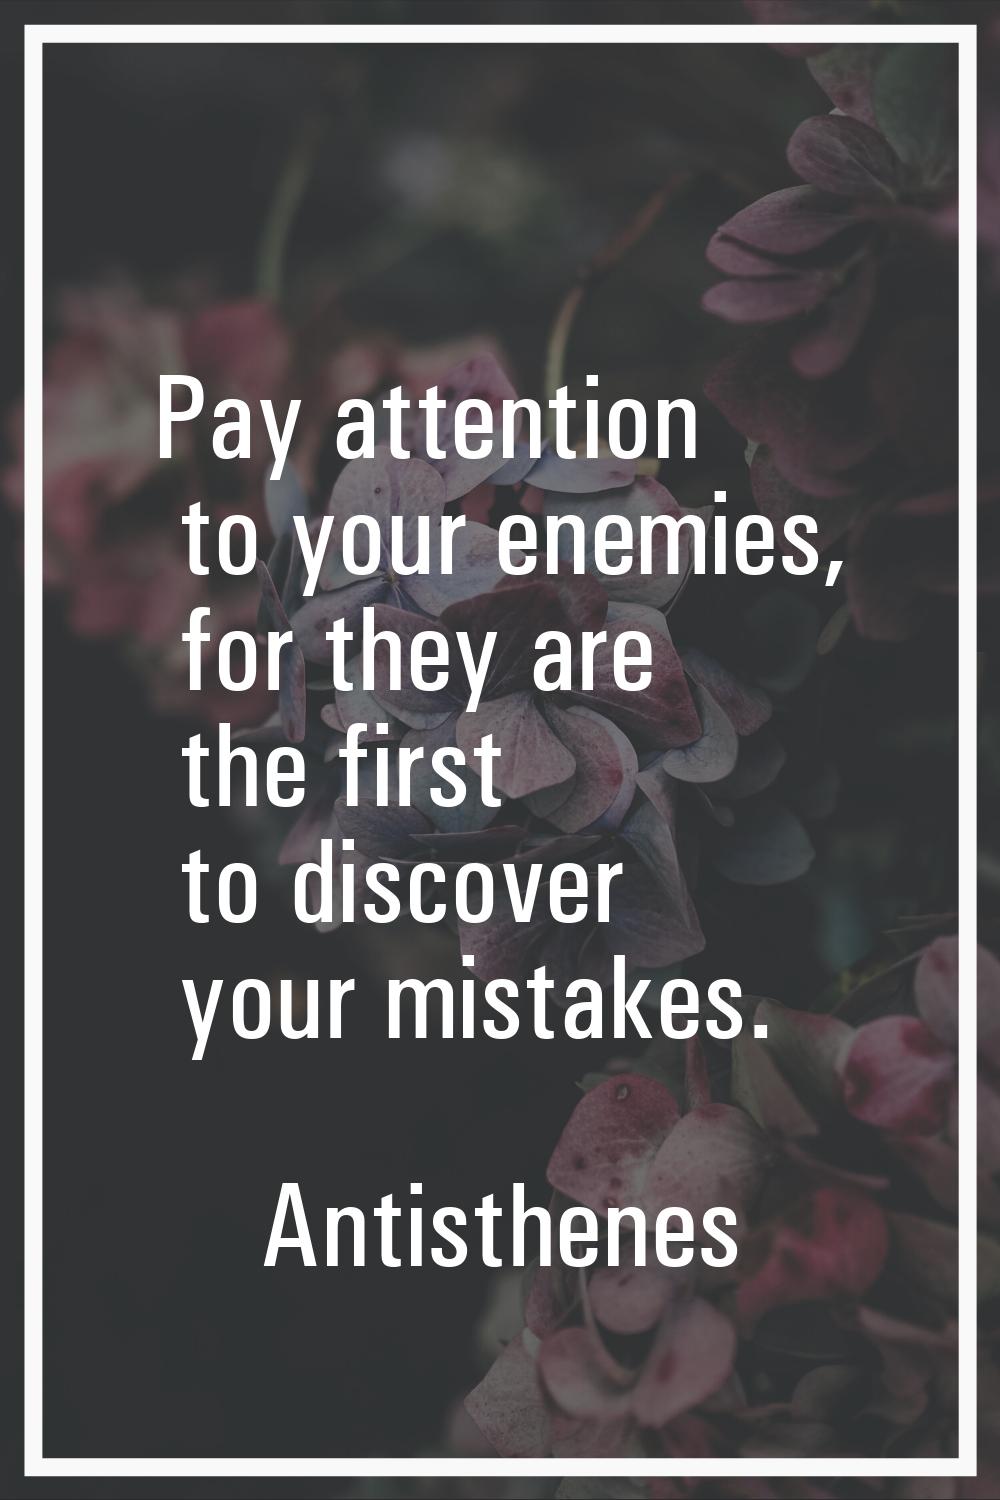 Pay attention to your enemies, for they are the first to discover your mistakes.